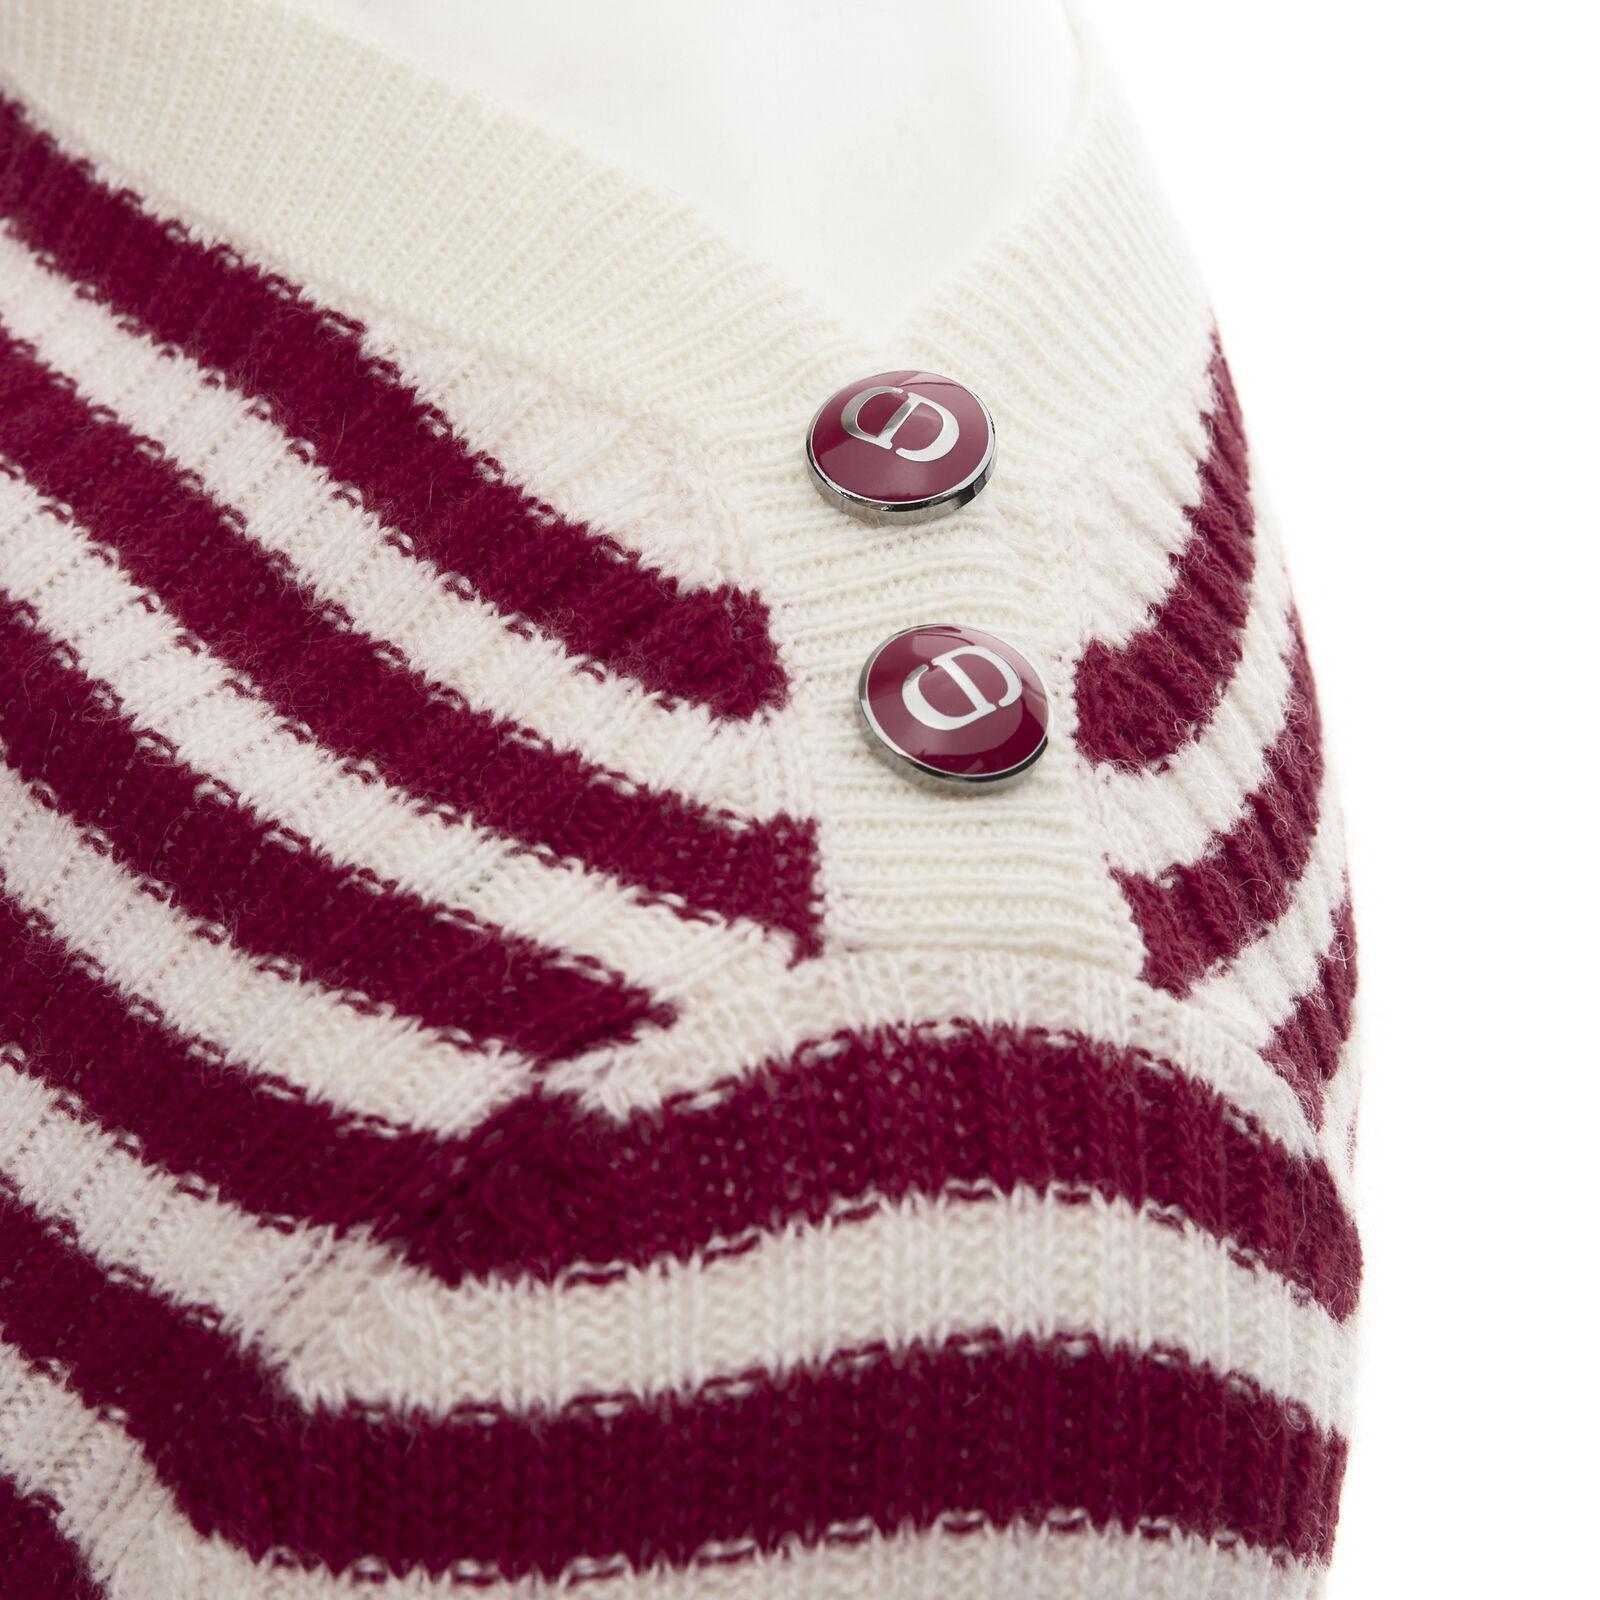 CHRISTIAN DIOR 100% cashmere white red striped boat neck CD button top FR34 XS
Reference: AAWC/A00235
Brand: Christian Dior
Designer: Maria Grazia Chiuri
Material: 100% Cashmere
Color: Red, White
Pattern: Striped
Closure: Button
Extra Details: